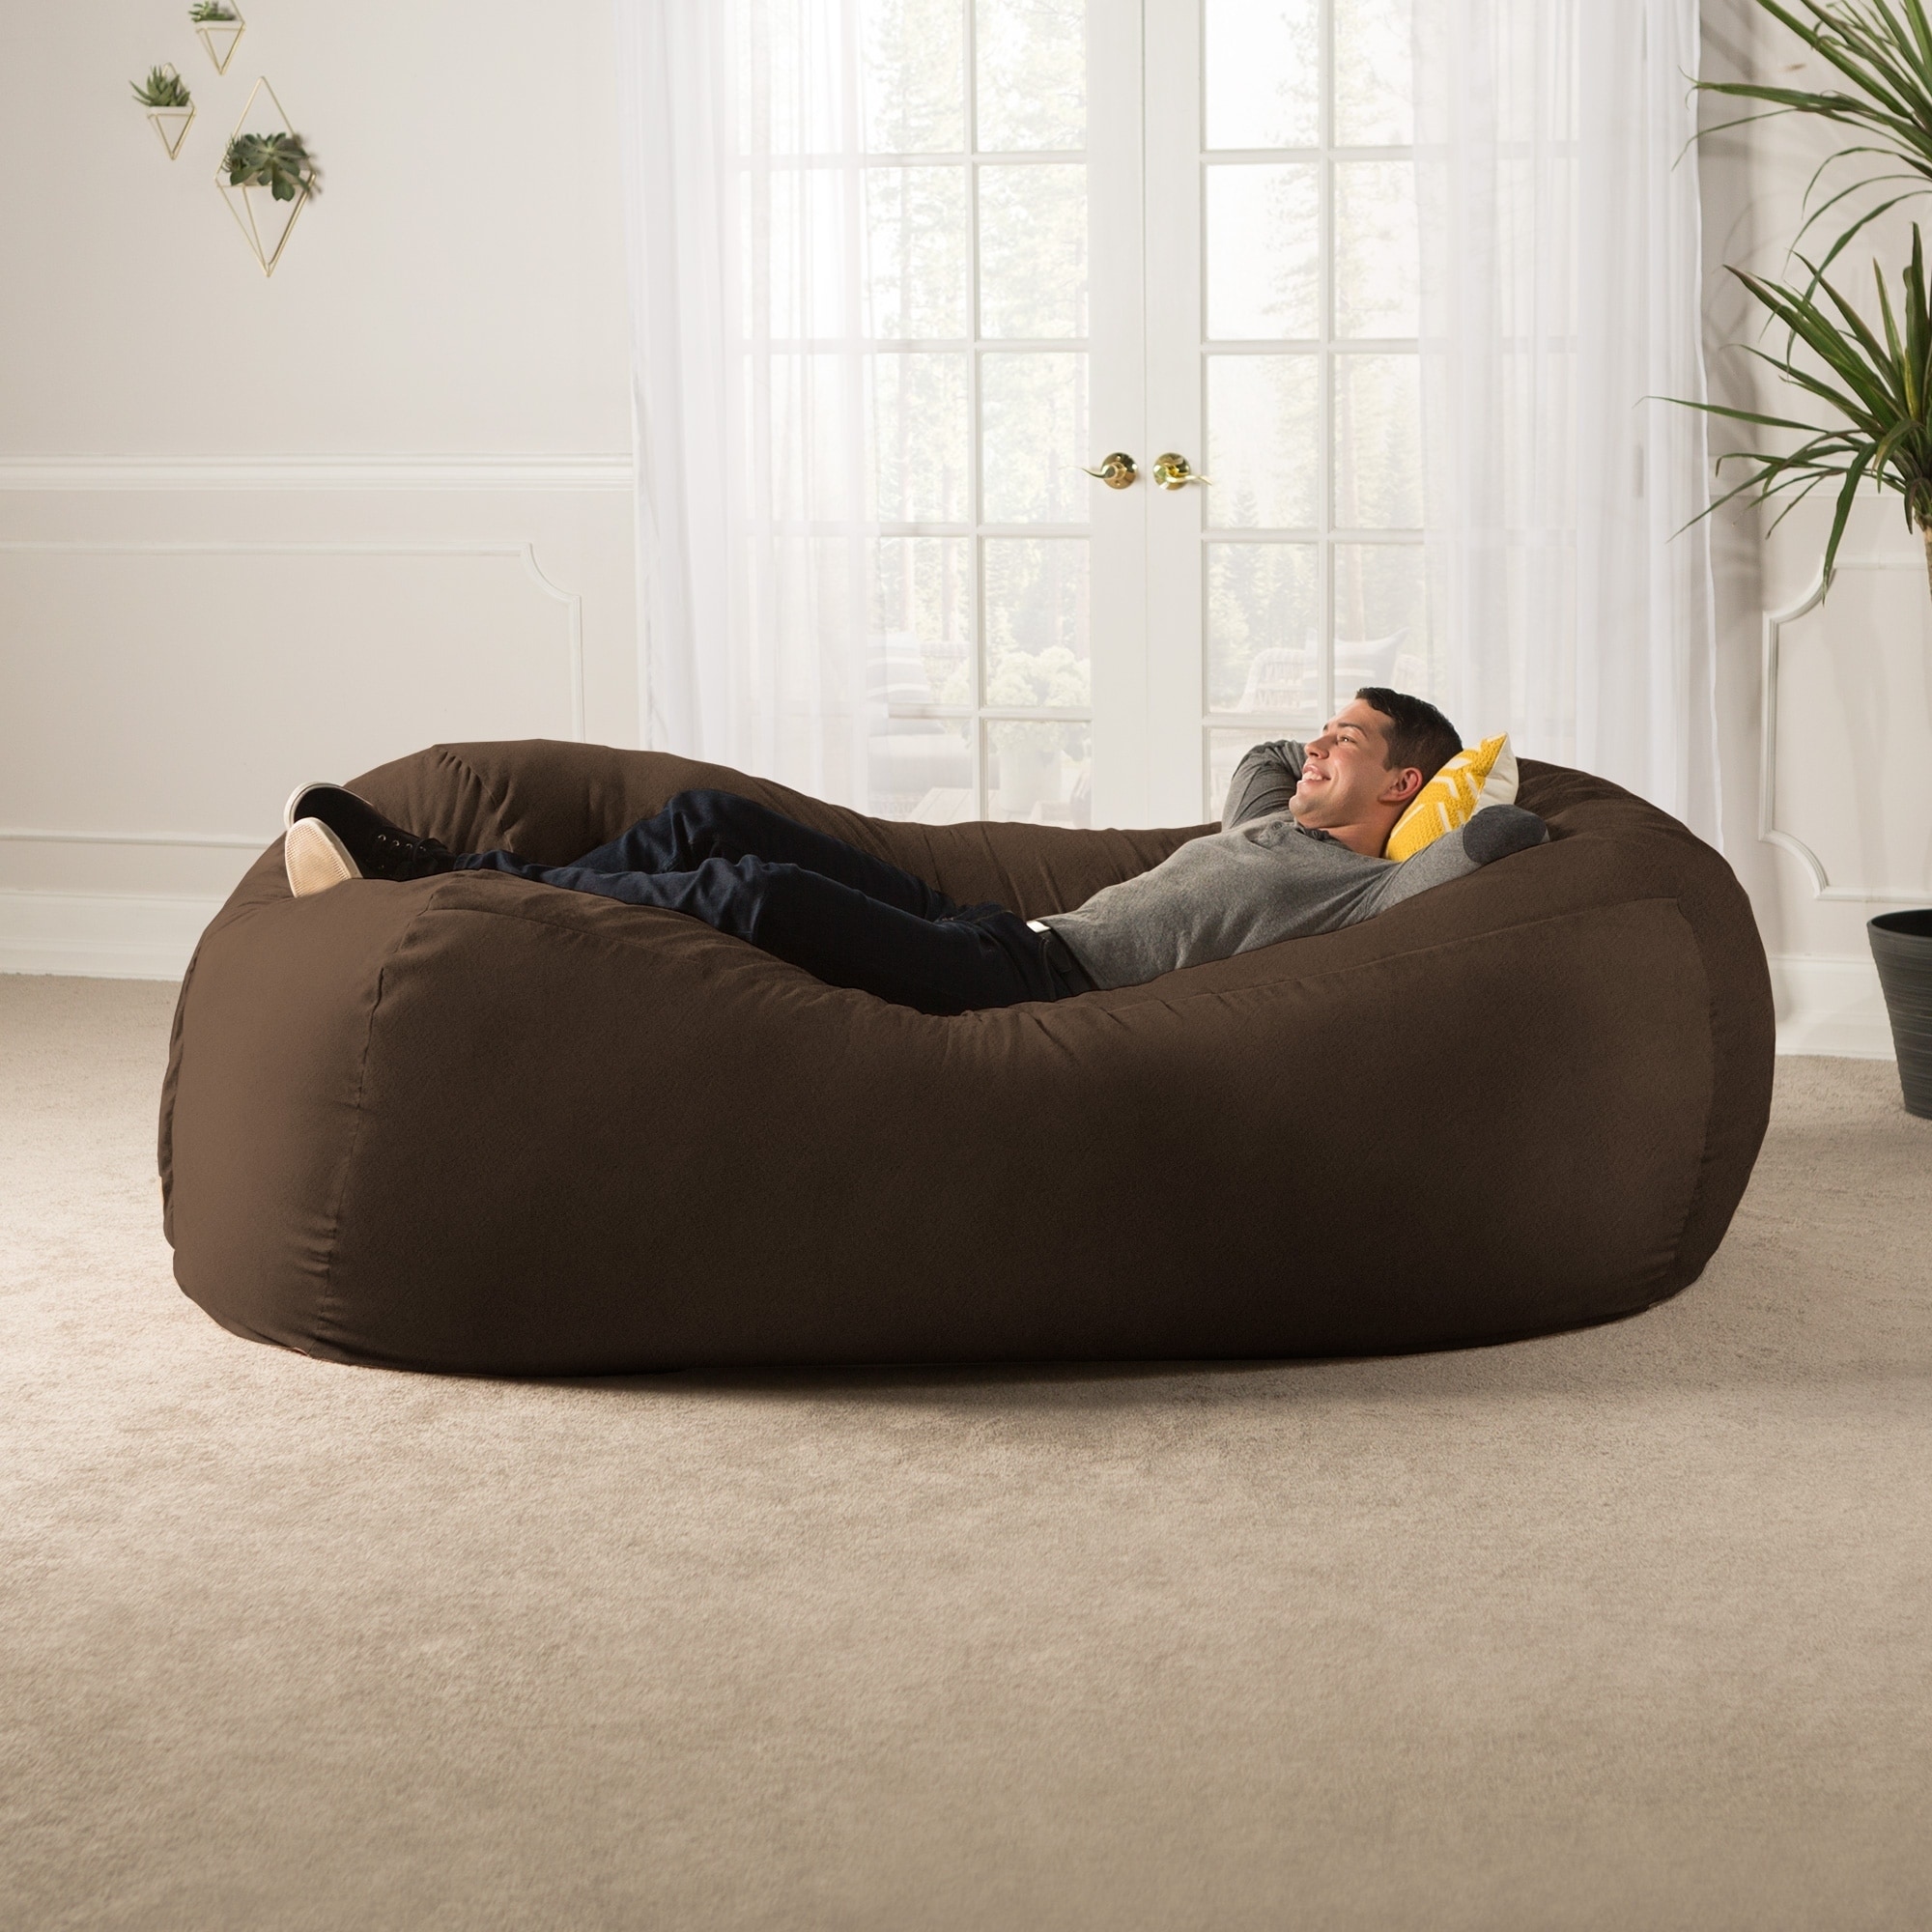 Large Bean Bag Sofa Cover Living Room Lazy Lounger Chair Protect Cover  56FT US  eBay